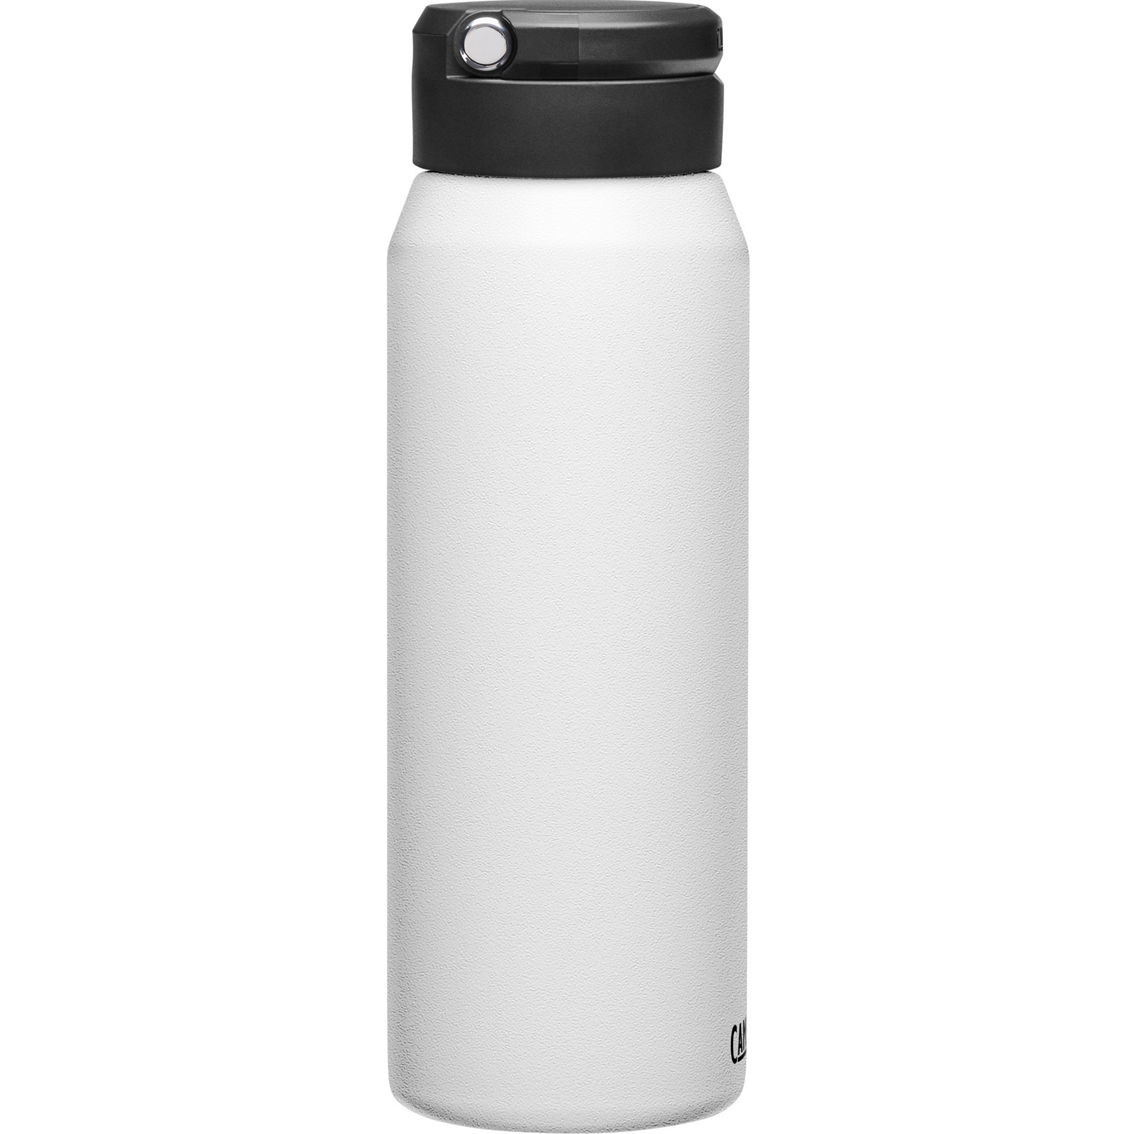 Camelbak Fit Cap Insulated Stainless Steel Water Bottle 32 oz. - Image 7 of 8